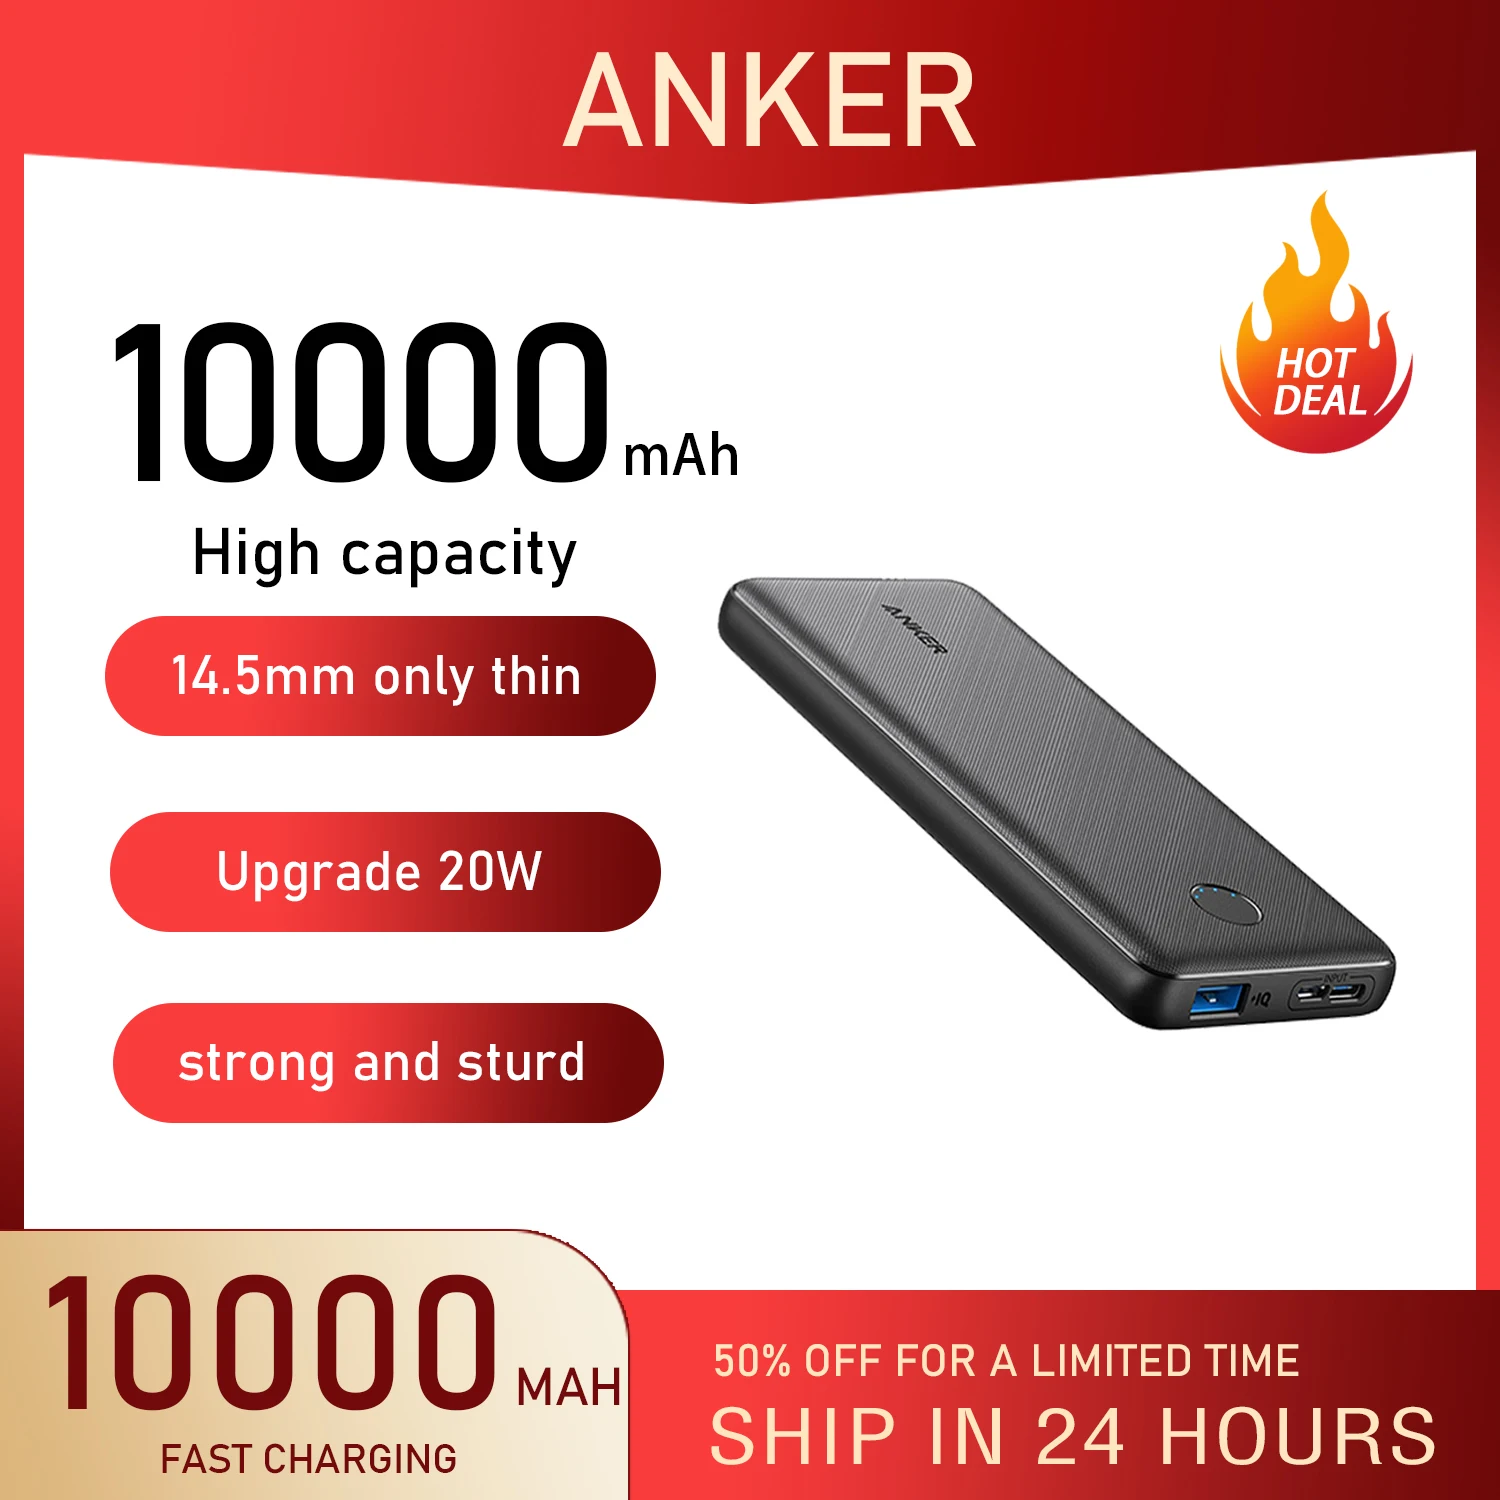 

Anker 10000mAh Portable Power Bank Fast Charge Charge with High Speed PowerIQ Charging Technology and USB-C for iPhone, Samsung